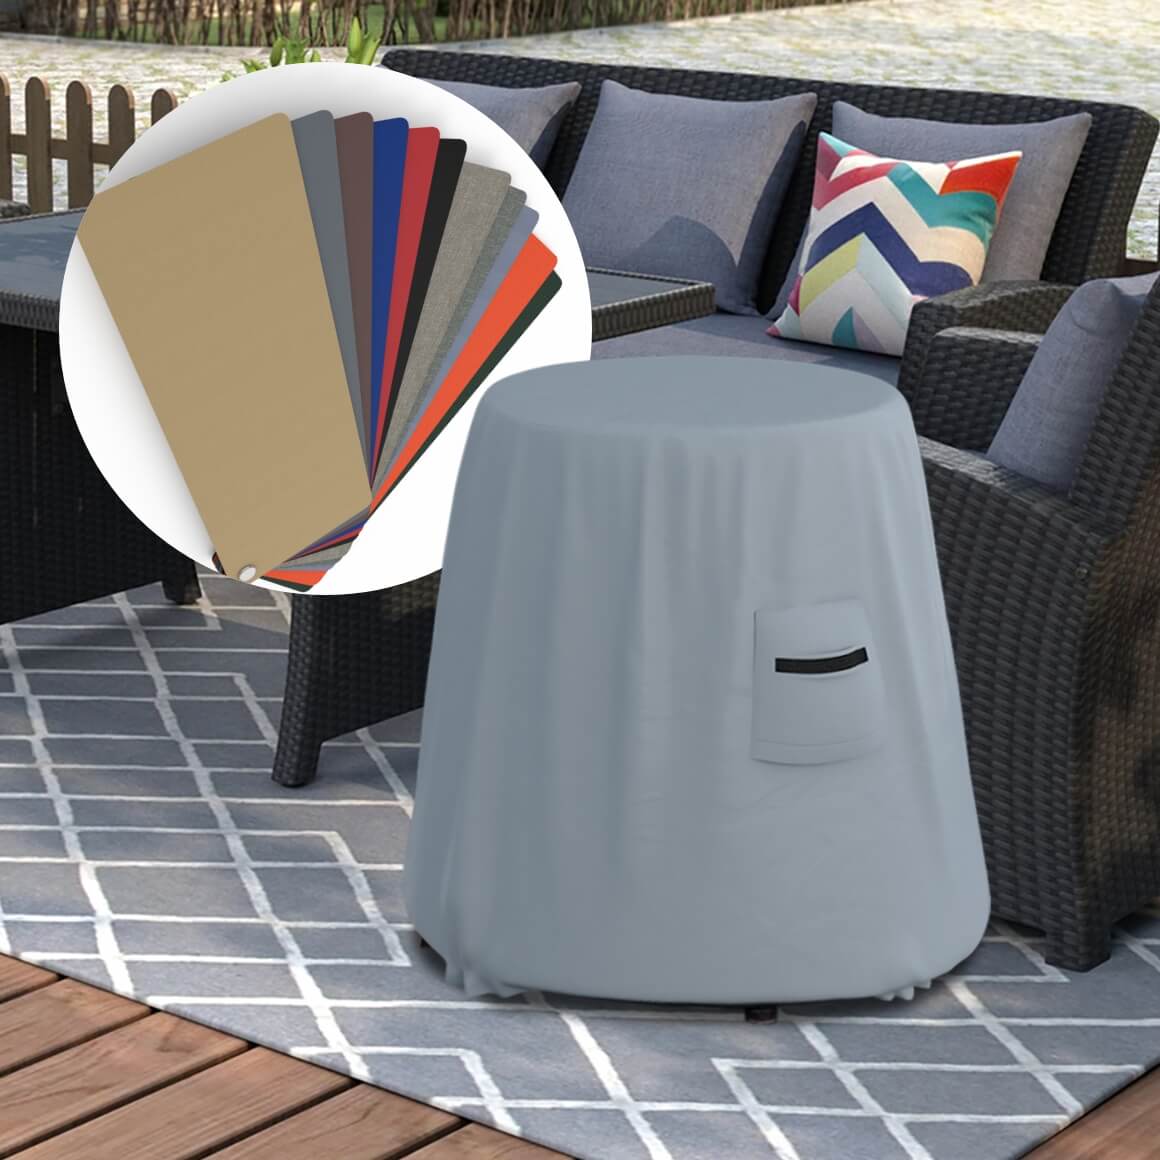 outdoor furniture fabric type